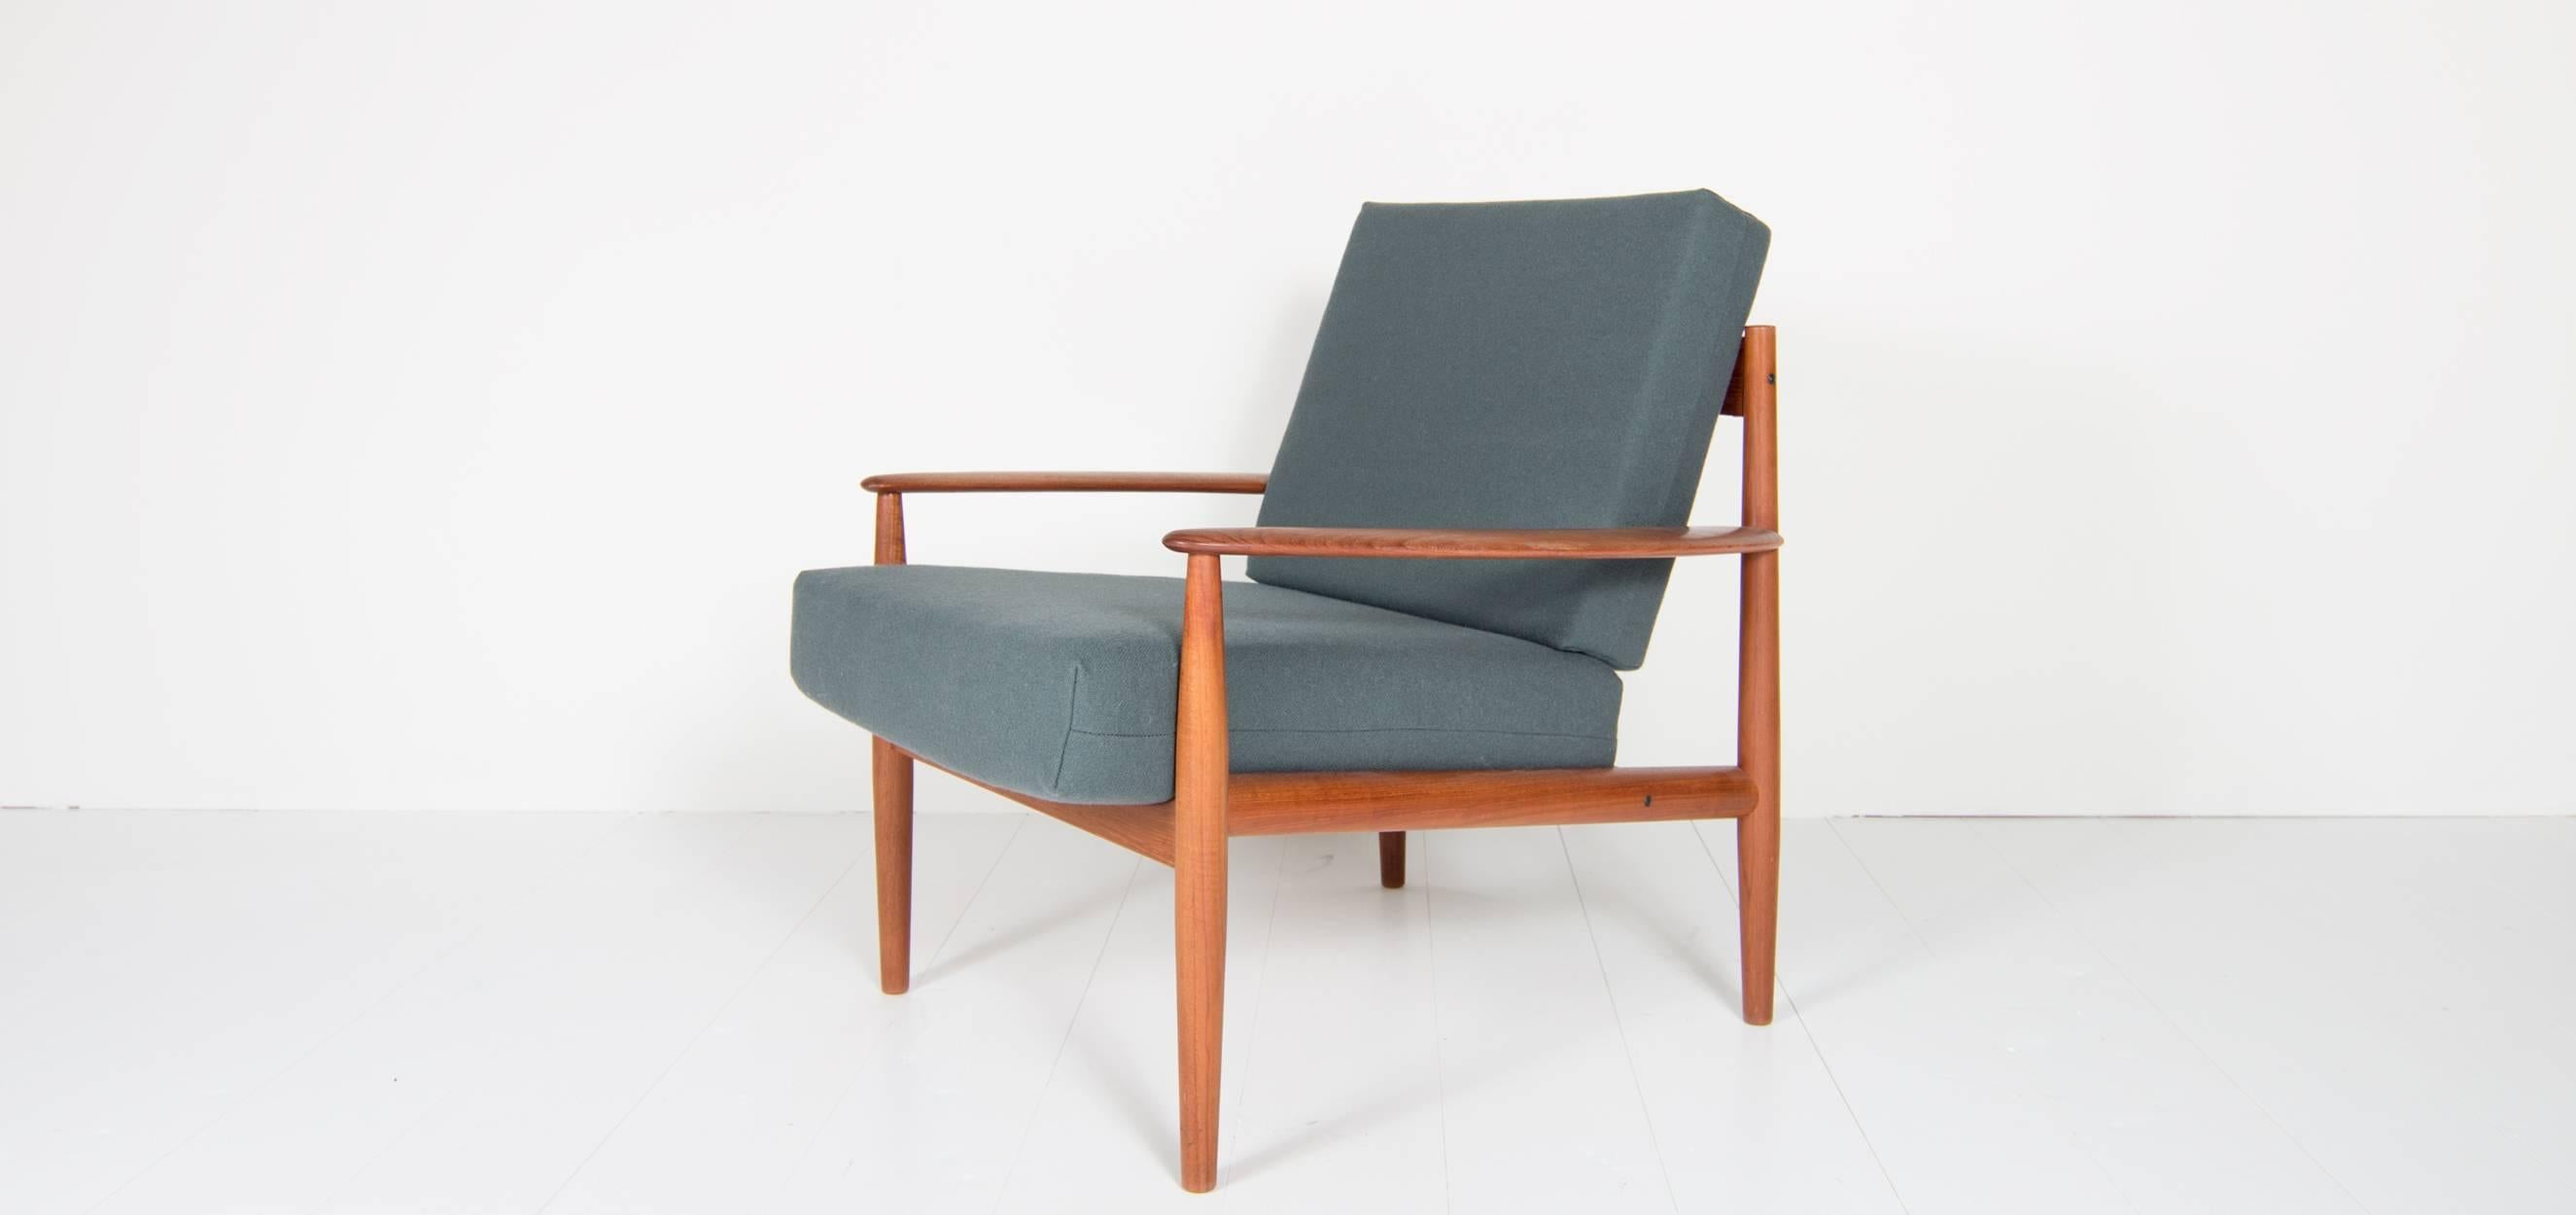 Grete Jalk chair model 118 produced by France and Son in Denmark. This Grete Jalk chair is new upholstered in grey fabric by Kvadrat; Tonus 4.
The chair is great designed in high end quality. Please look at the photos to see the great details. This